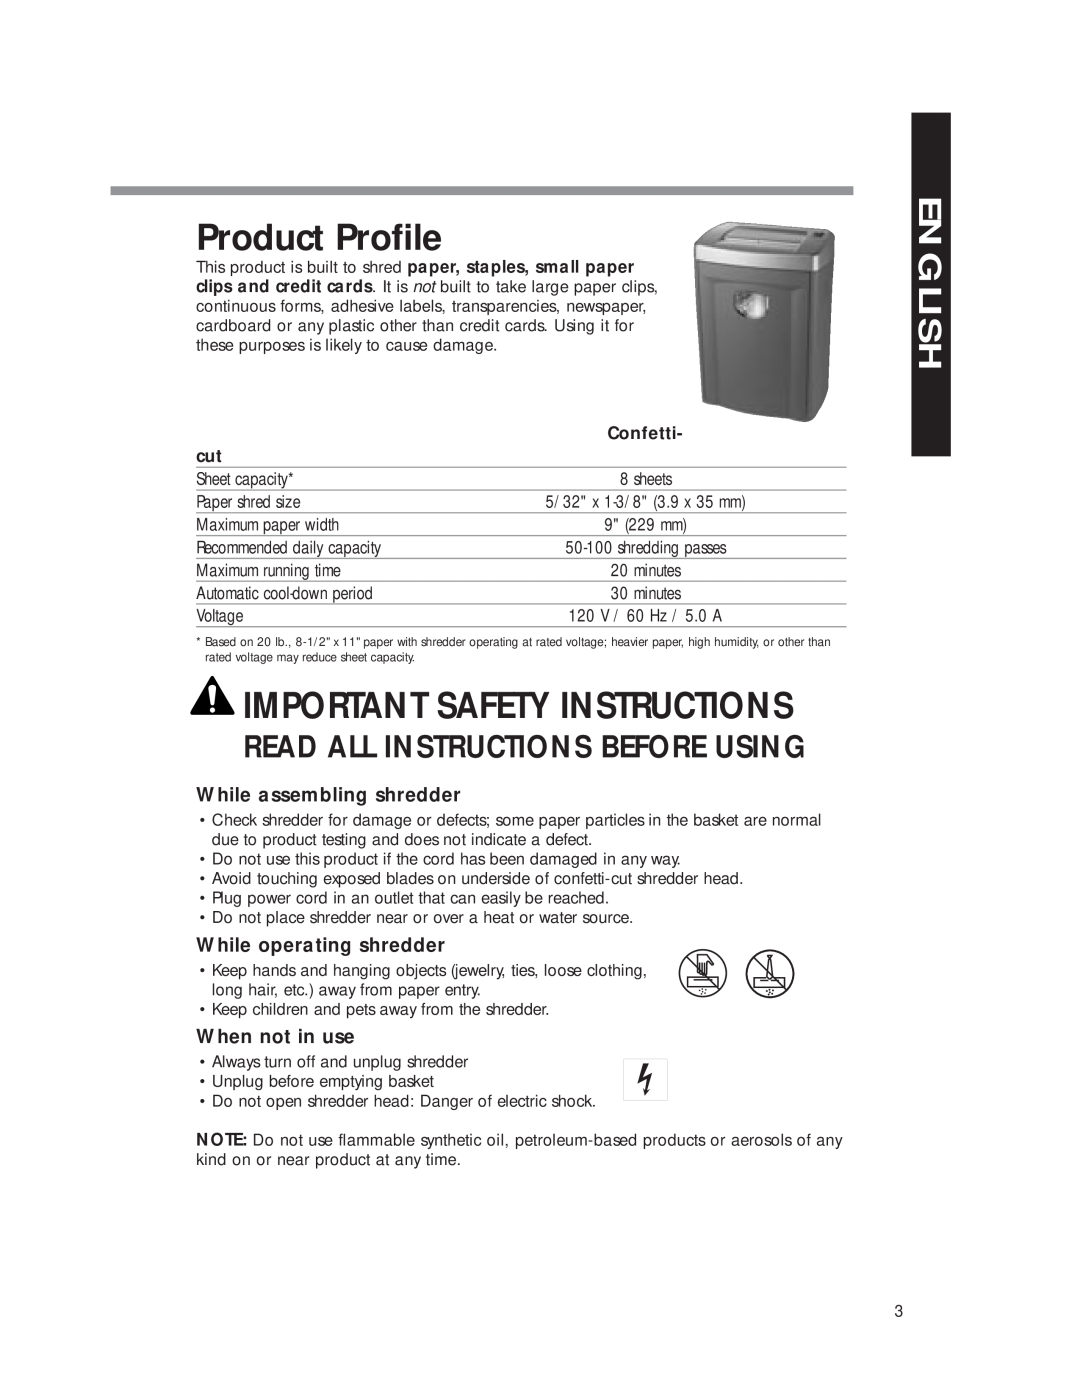 Fellowes DM8C Product Profile, English, Important Safety Instructions, Read All Instructions Before Using, When not in use 